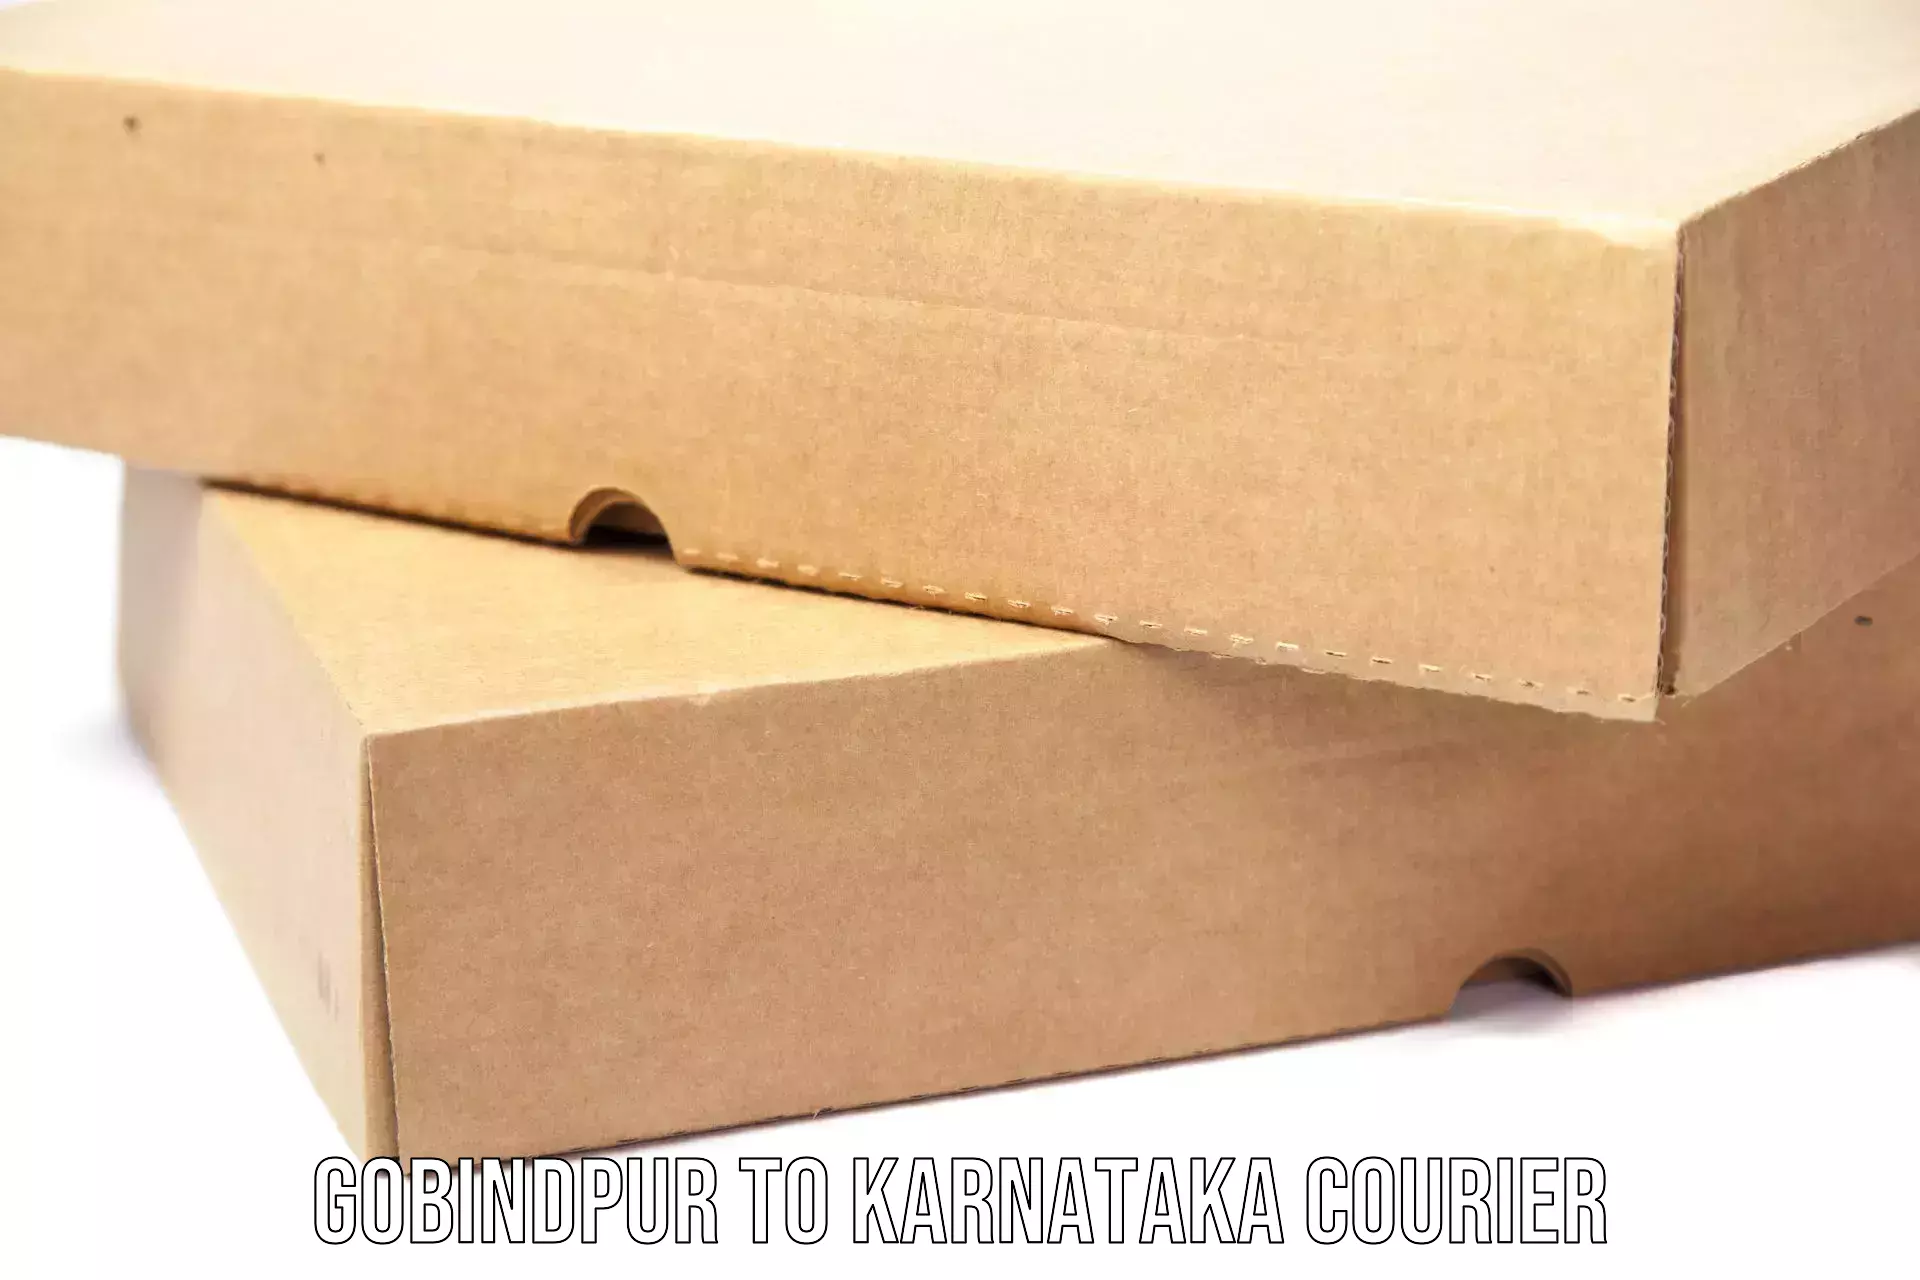 Nationwide courier service Gobindpur to Chikkamagalur